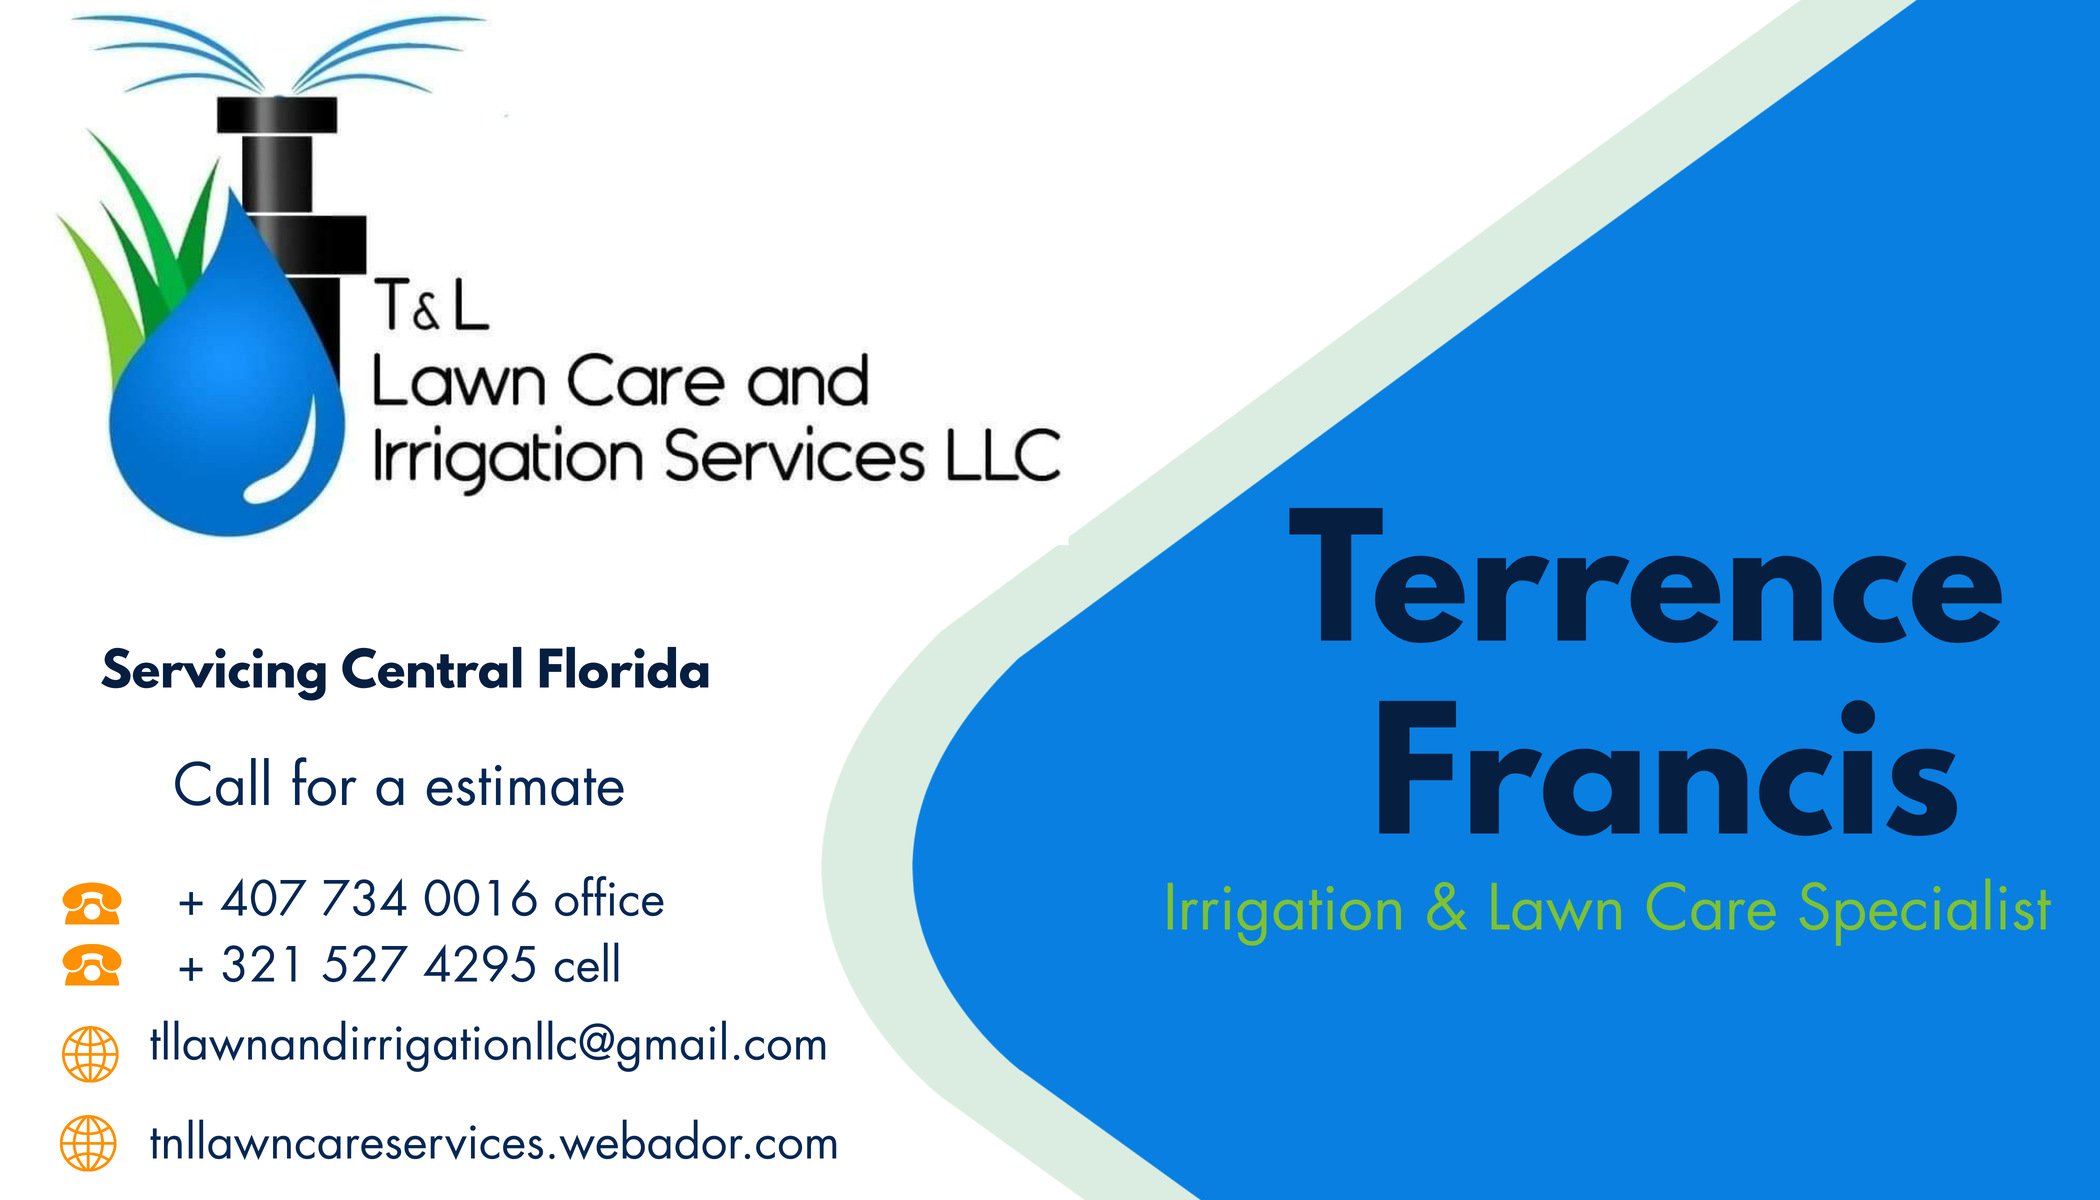 T&L Lawn Care and Irrigation Services LLC Logo